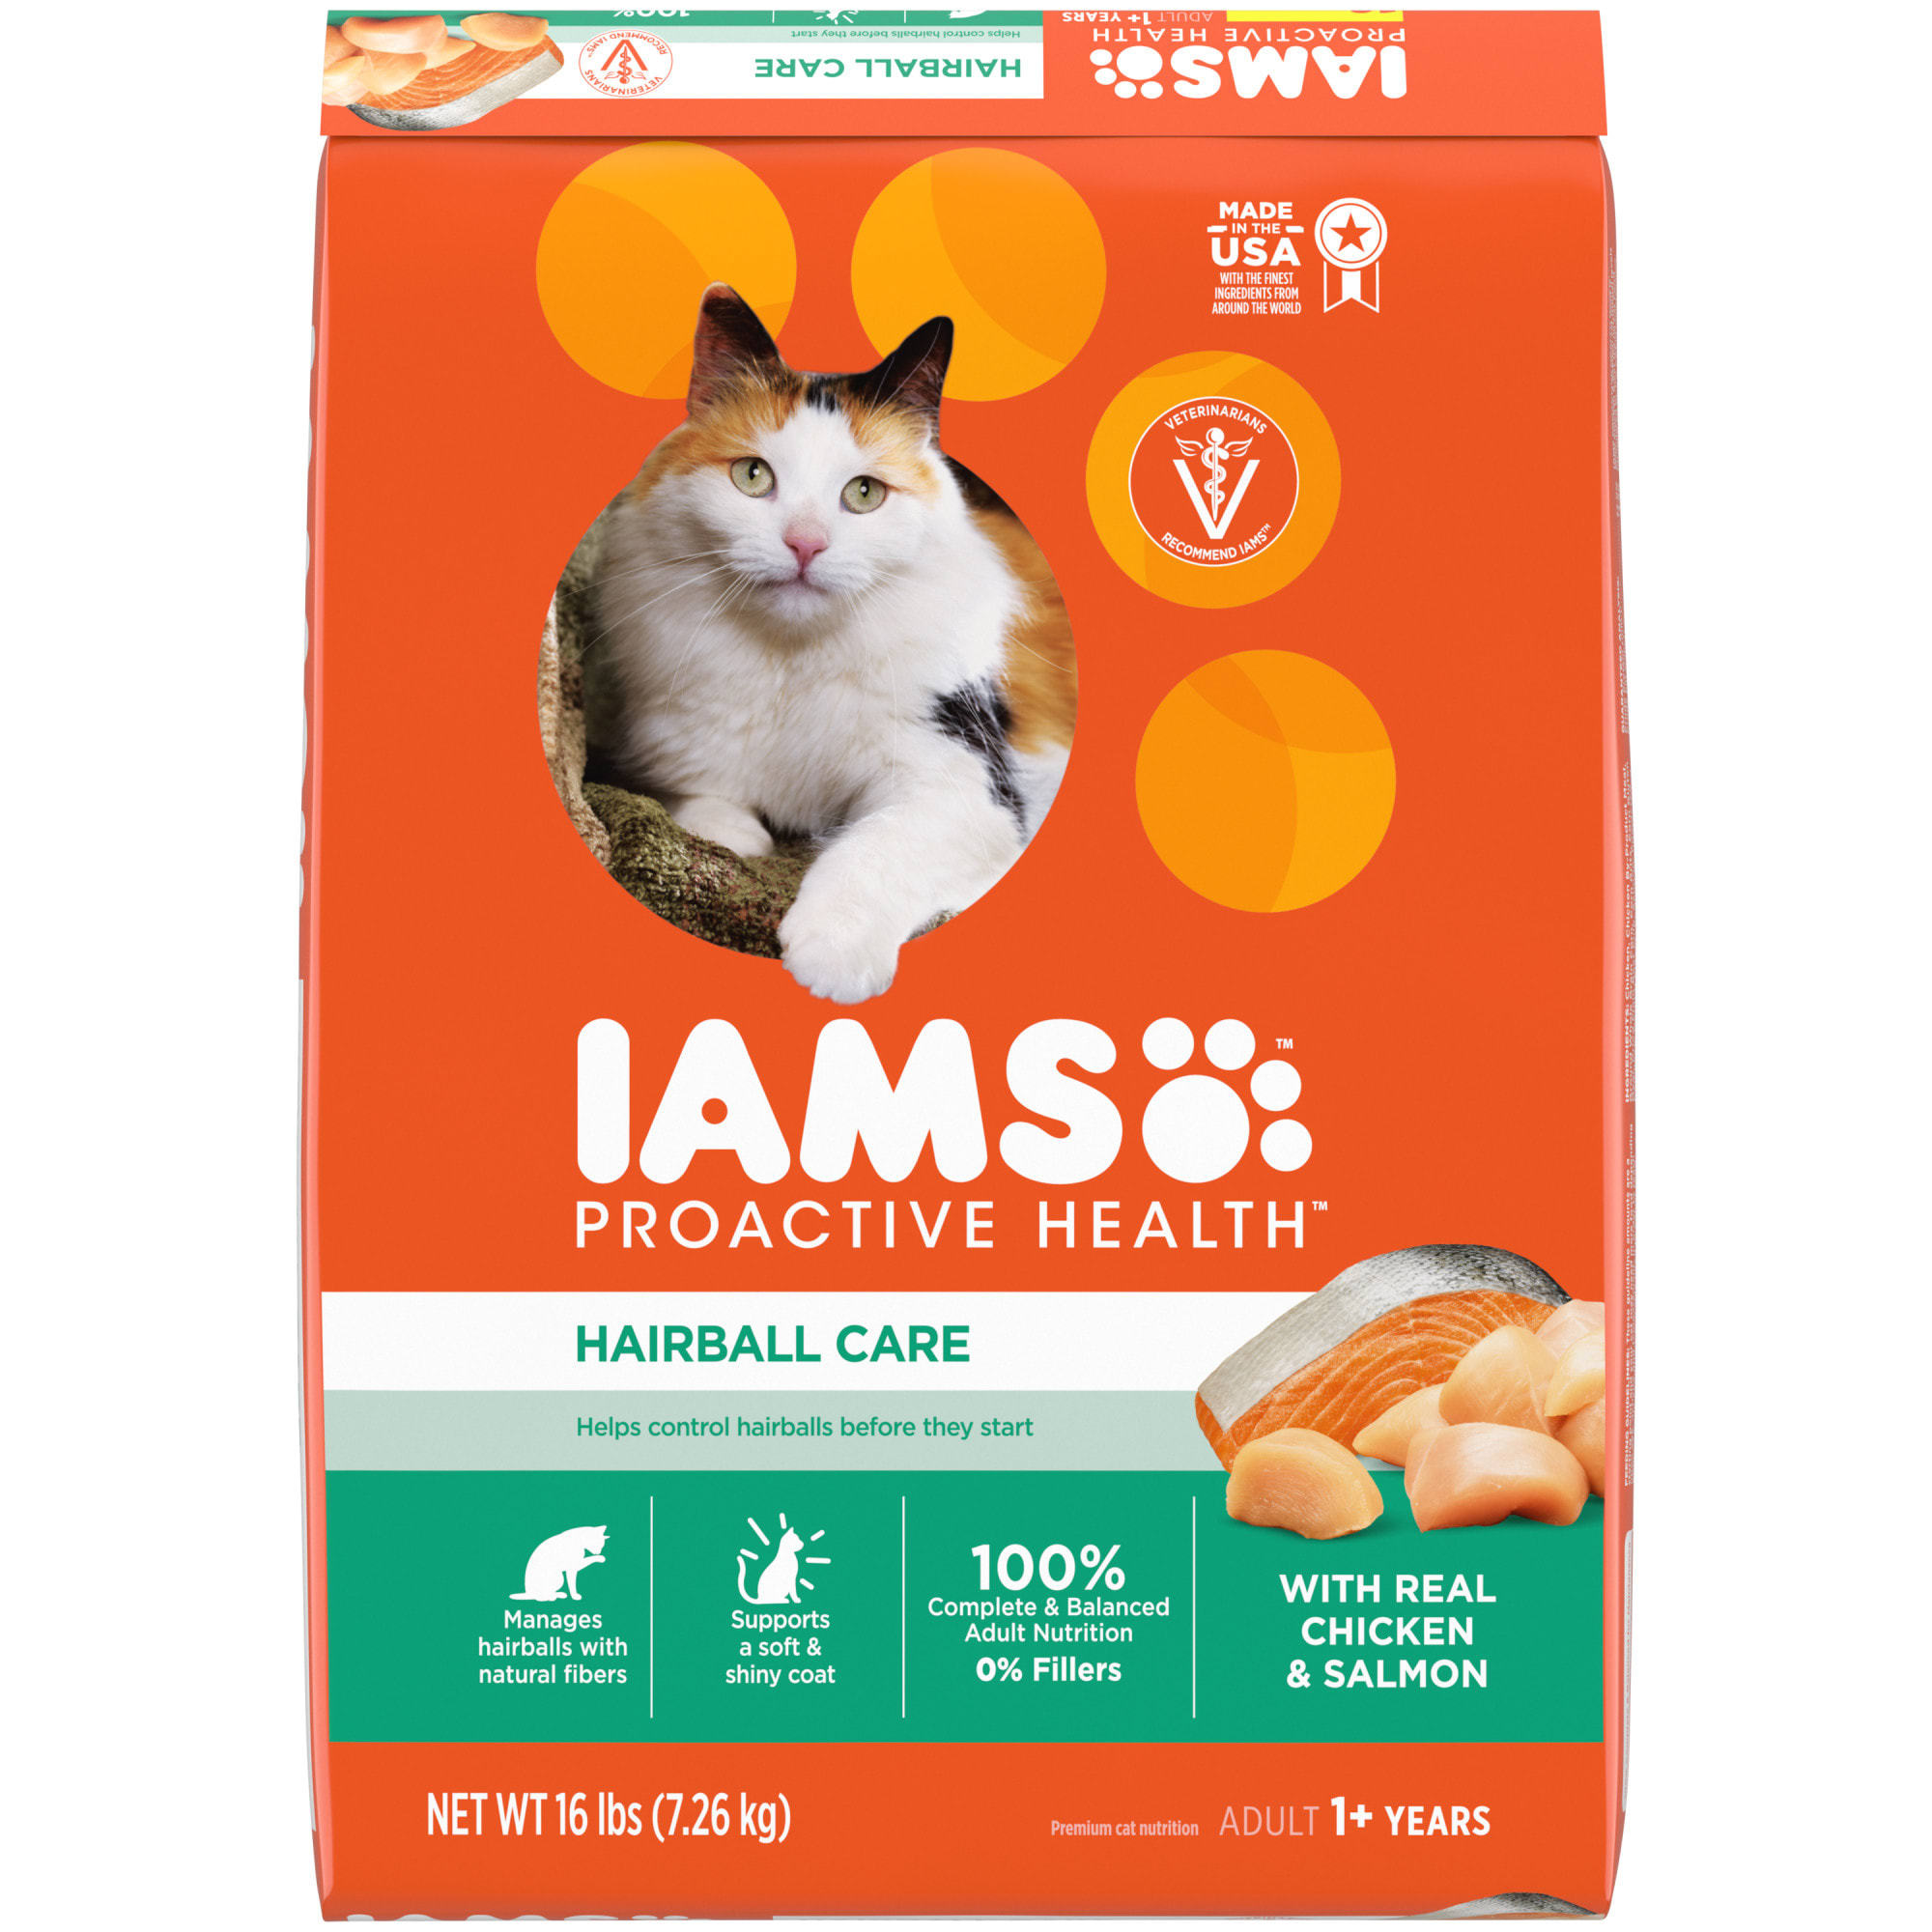 Iams ProActive Health Hairball Care Chicken and Salmon Adult Dry Cat